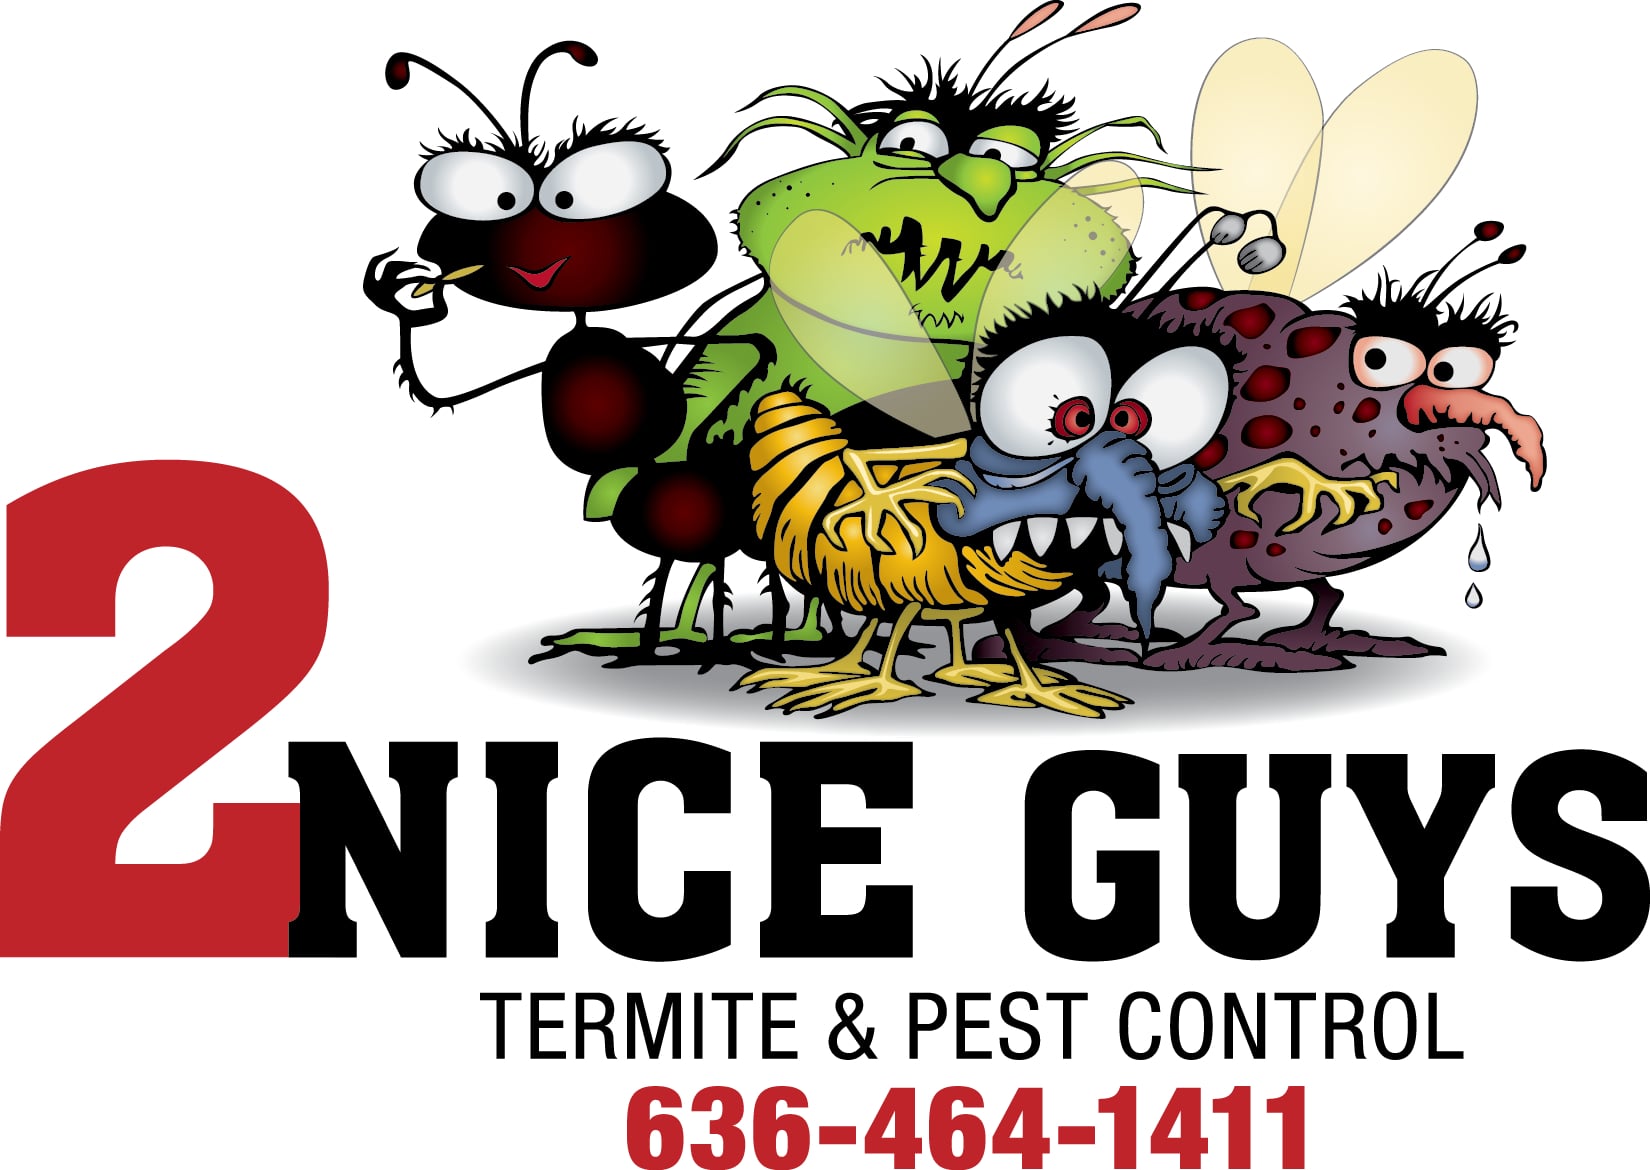 Working At Abc Pest Control Employee Reviews Indeed Com